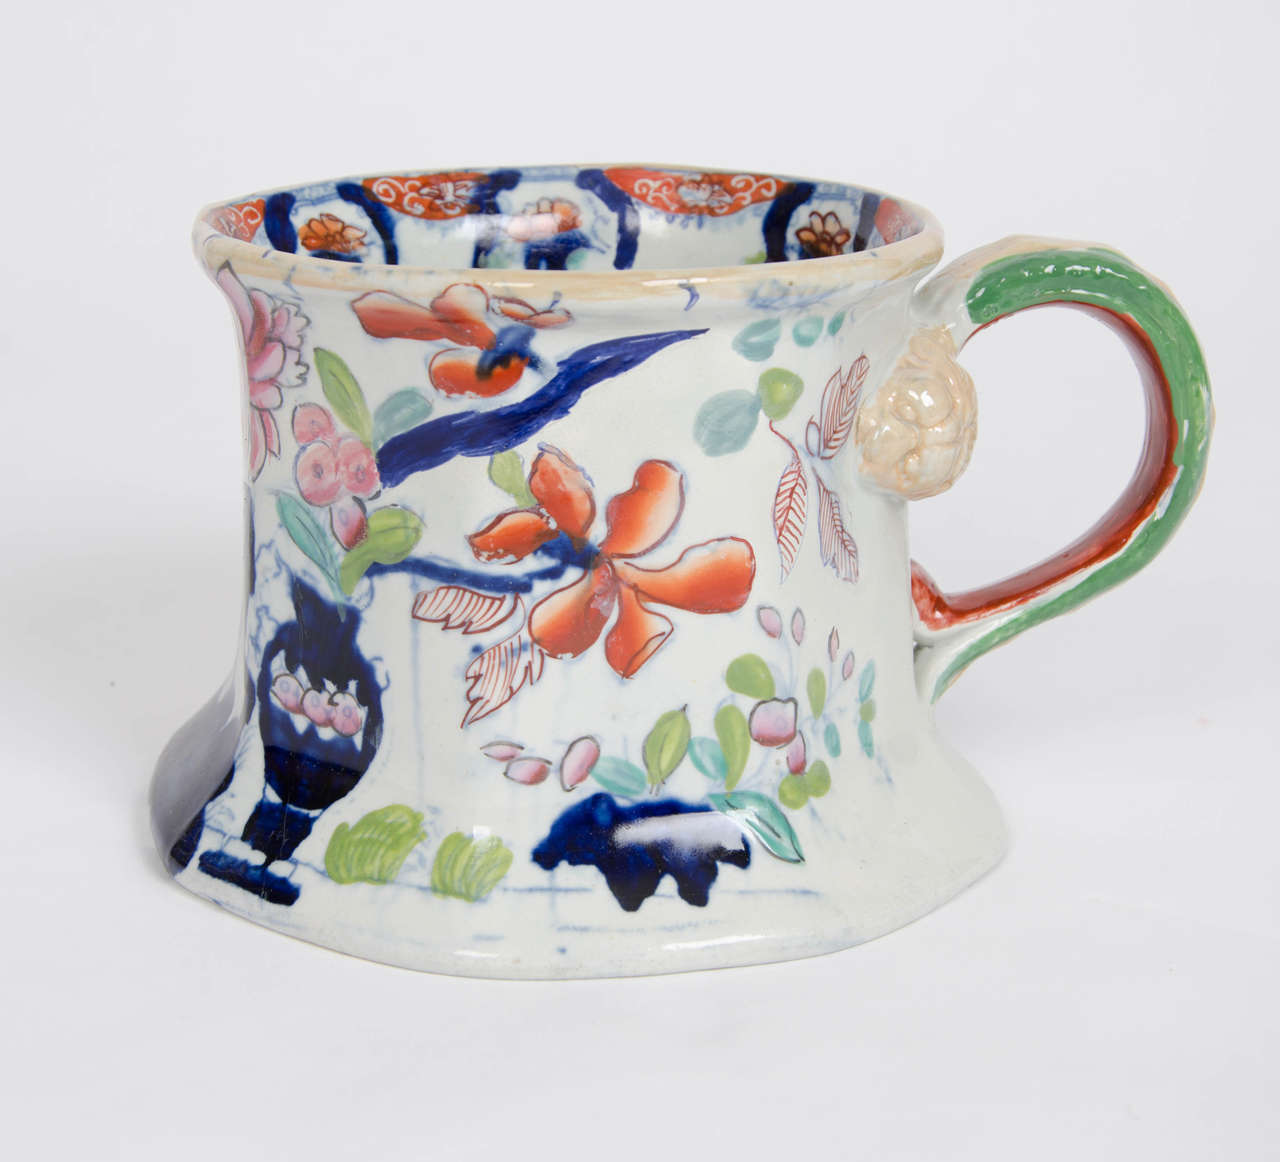 This is a large and impressive hand painted Cider Mug or Tankard made by Mason's Ironstone, England, with a very early date in the Georgian period, circa 1815.

These very early large cider mugs / tankards are quite rare.

The mug is octagonal in